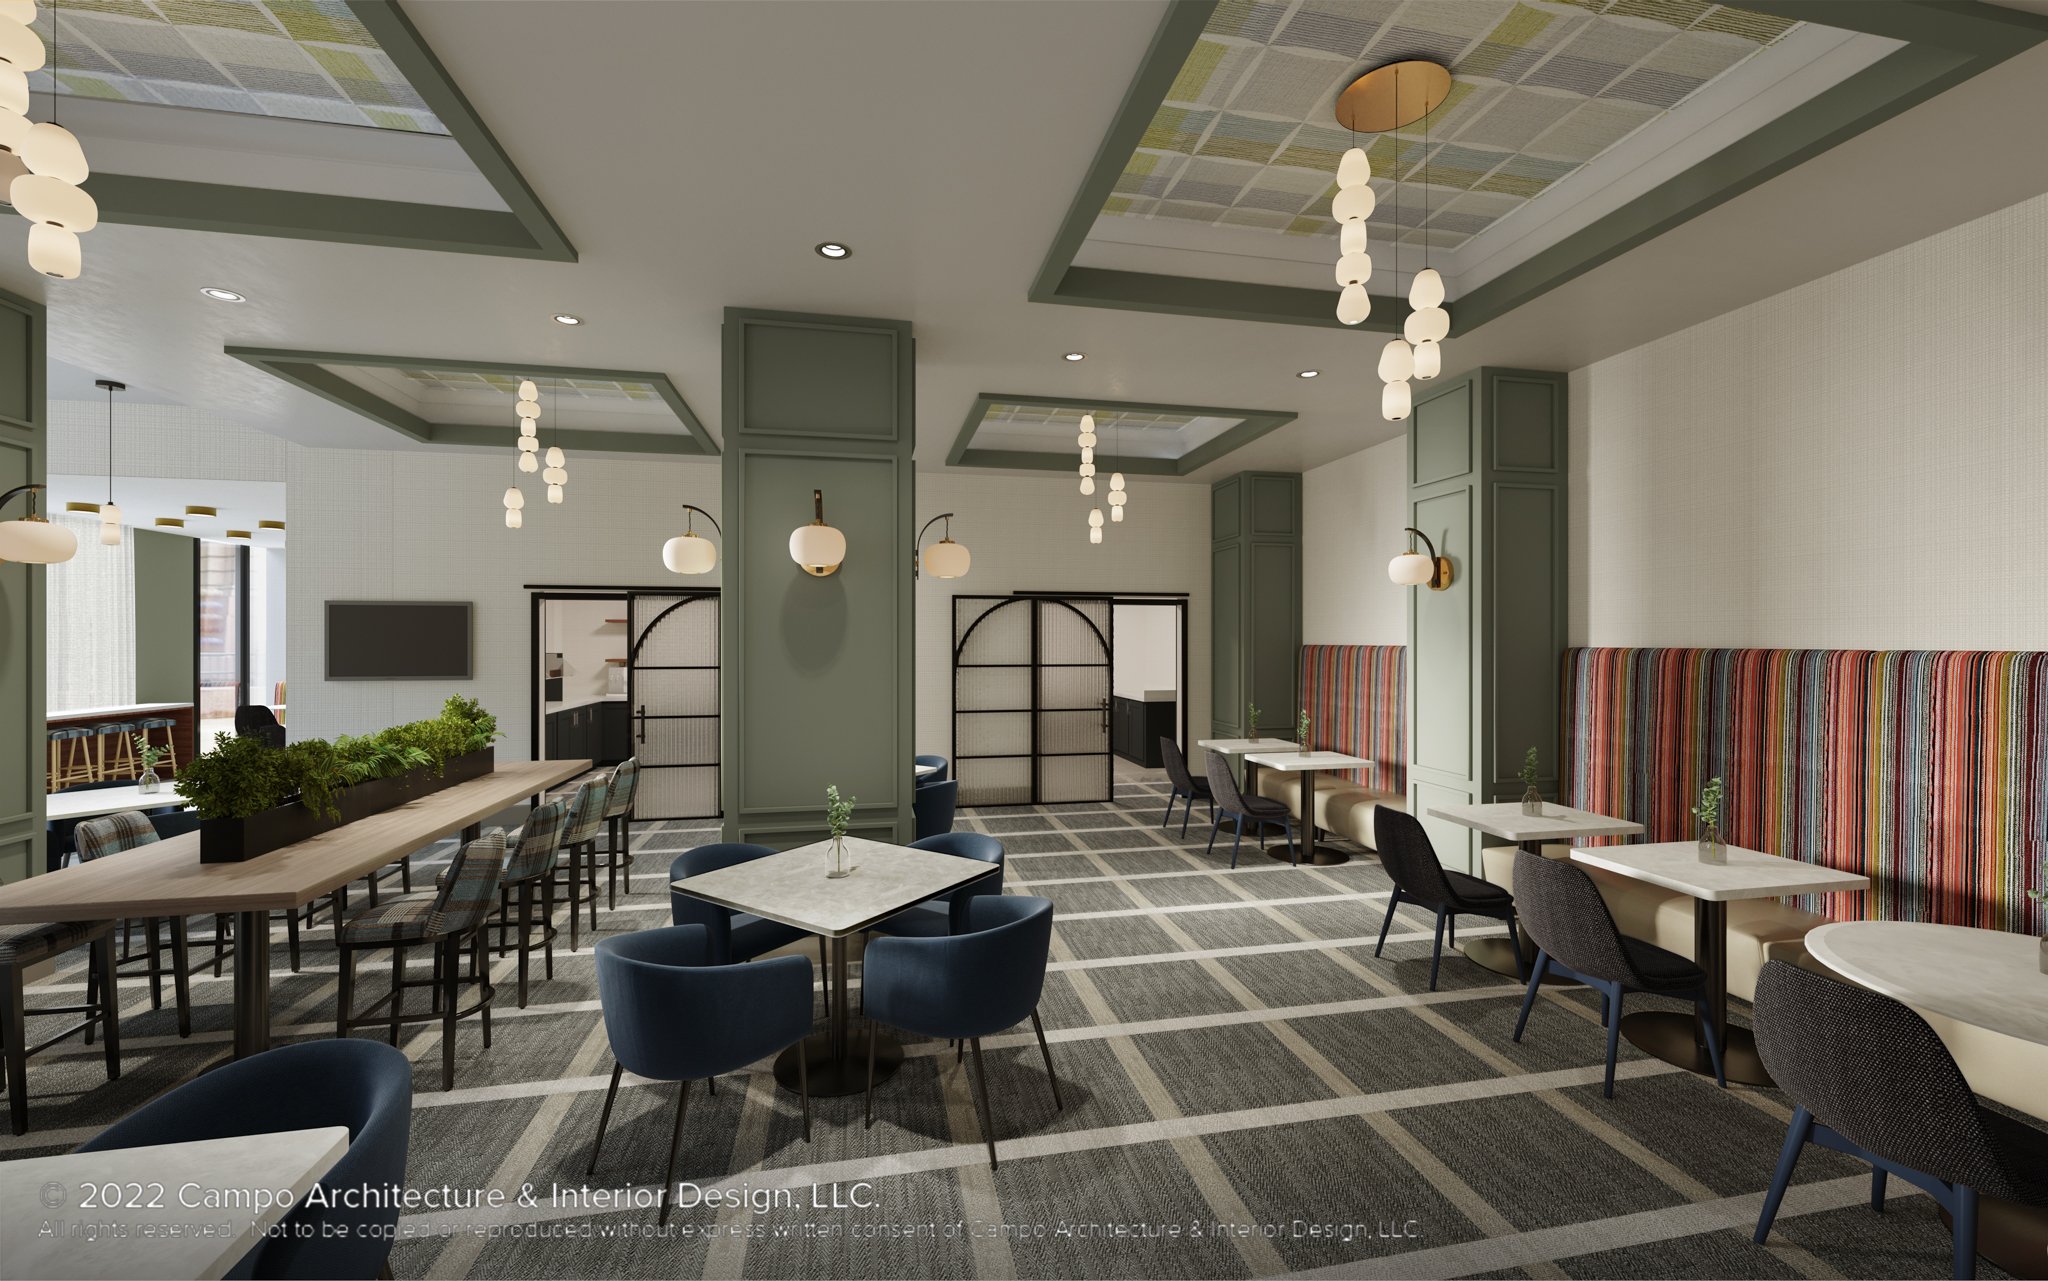 CHEMICAL BUILDING - ST. LOUIS, MO - INTERIOR RENDERING 3